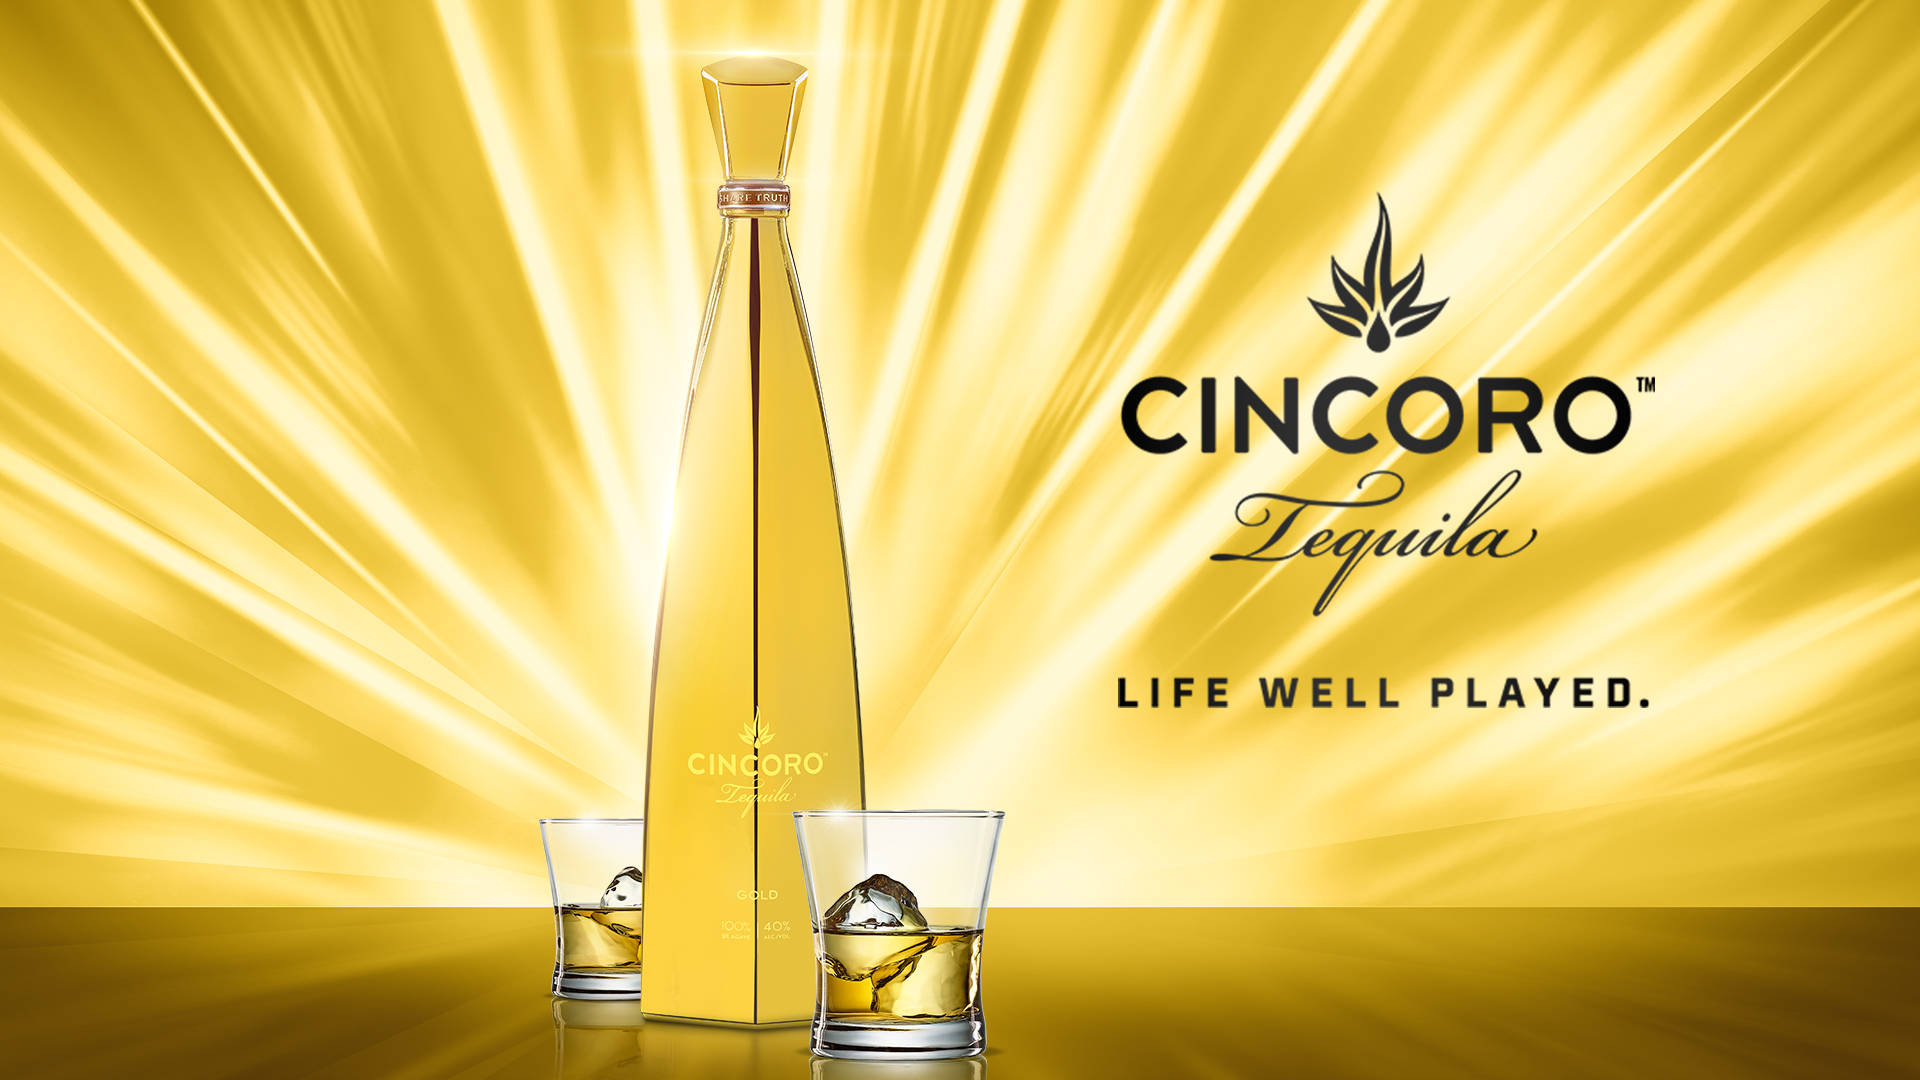 Gold Cincoro Tequila Life Well Played Poster Wallpaper